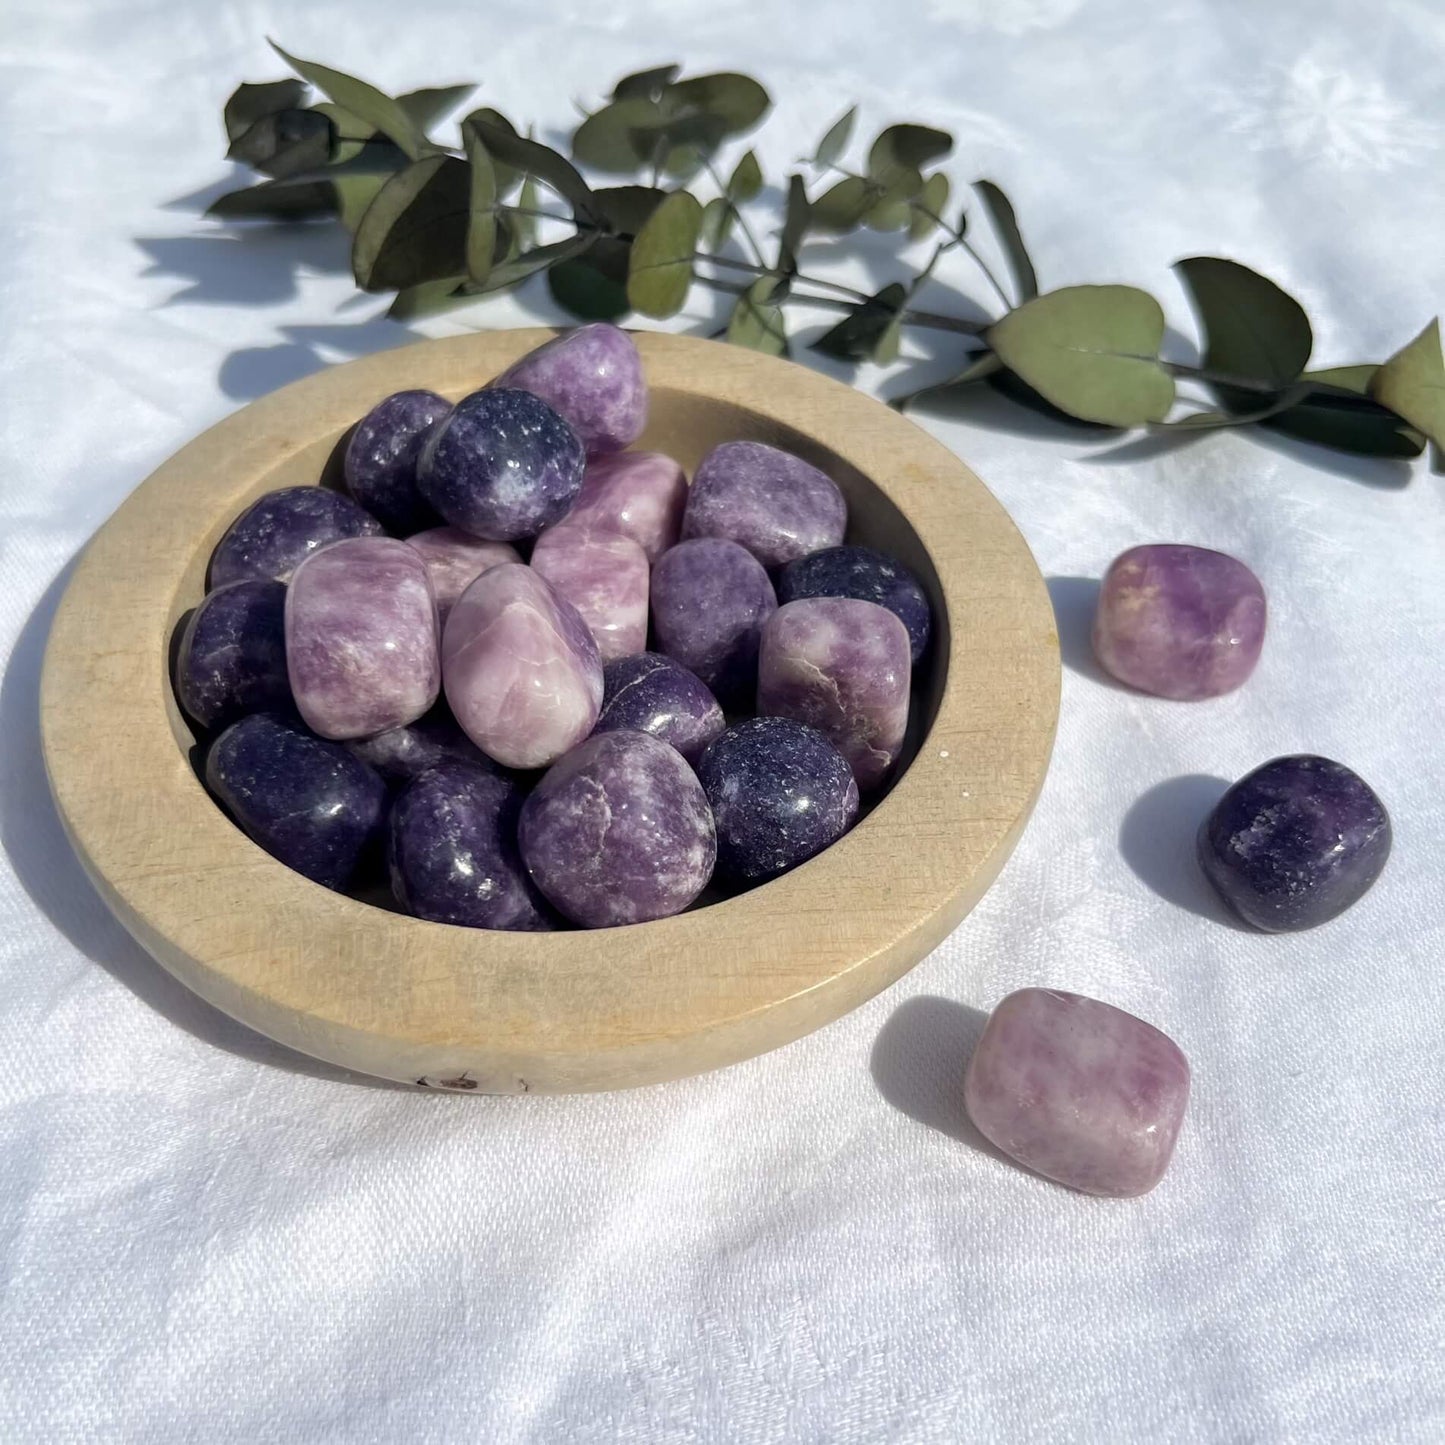 Dark and pale purple and white patterned lepidolite crystal tumblestones spilling from a wooden dish